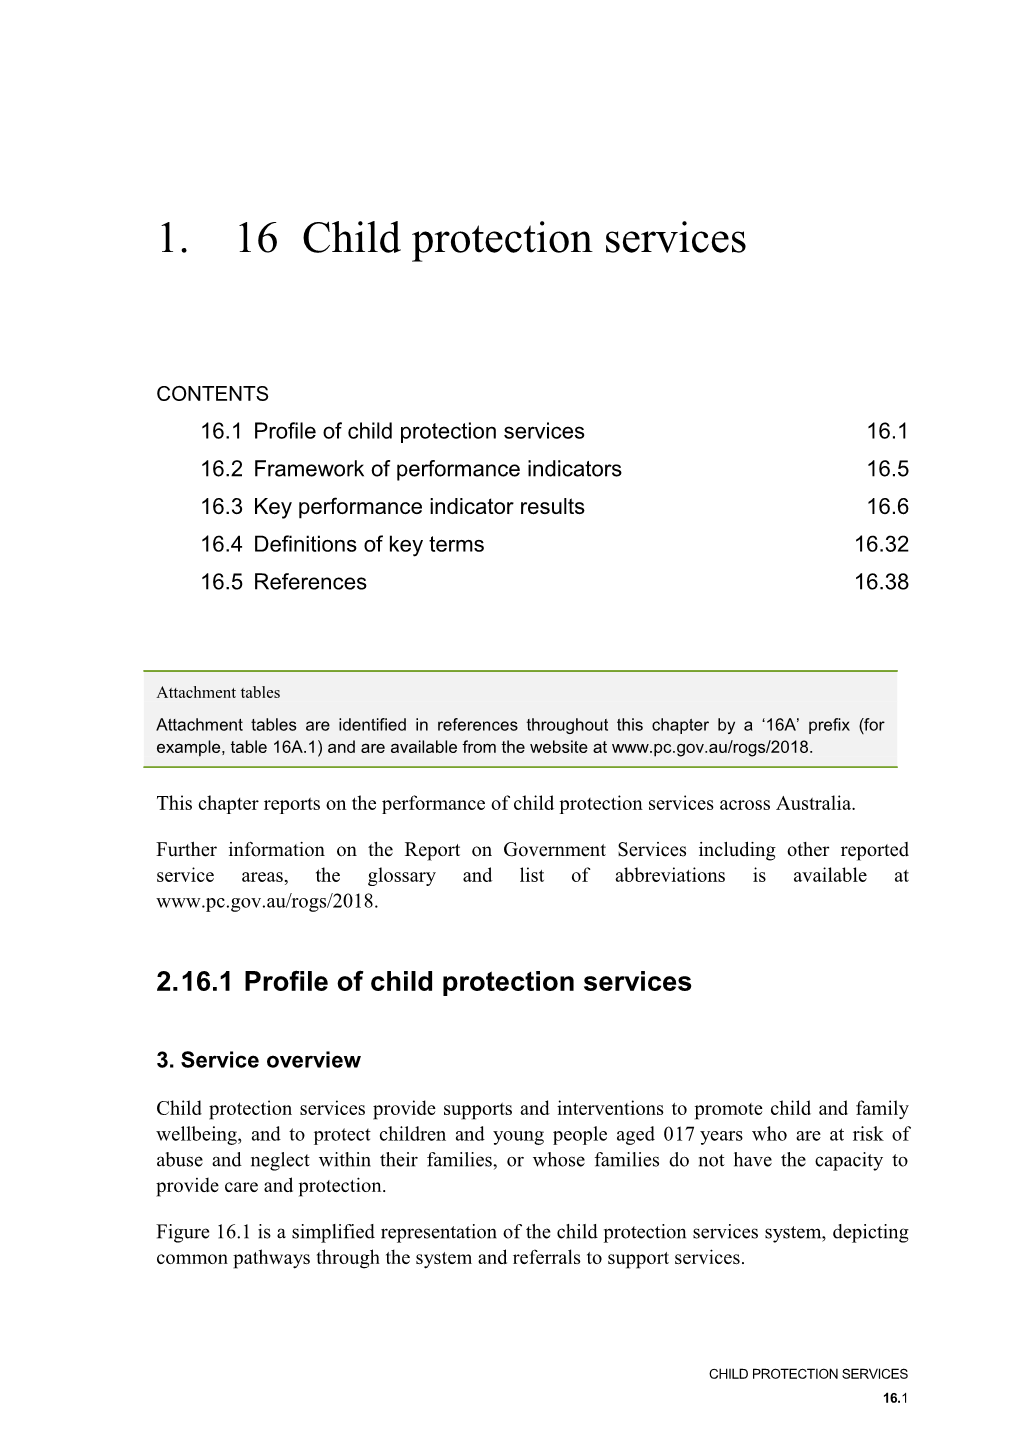 Chapter 16 Child Protection Services - Report on Government Services 2018